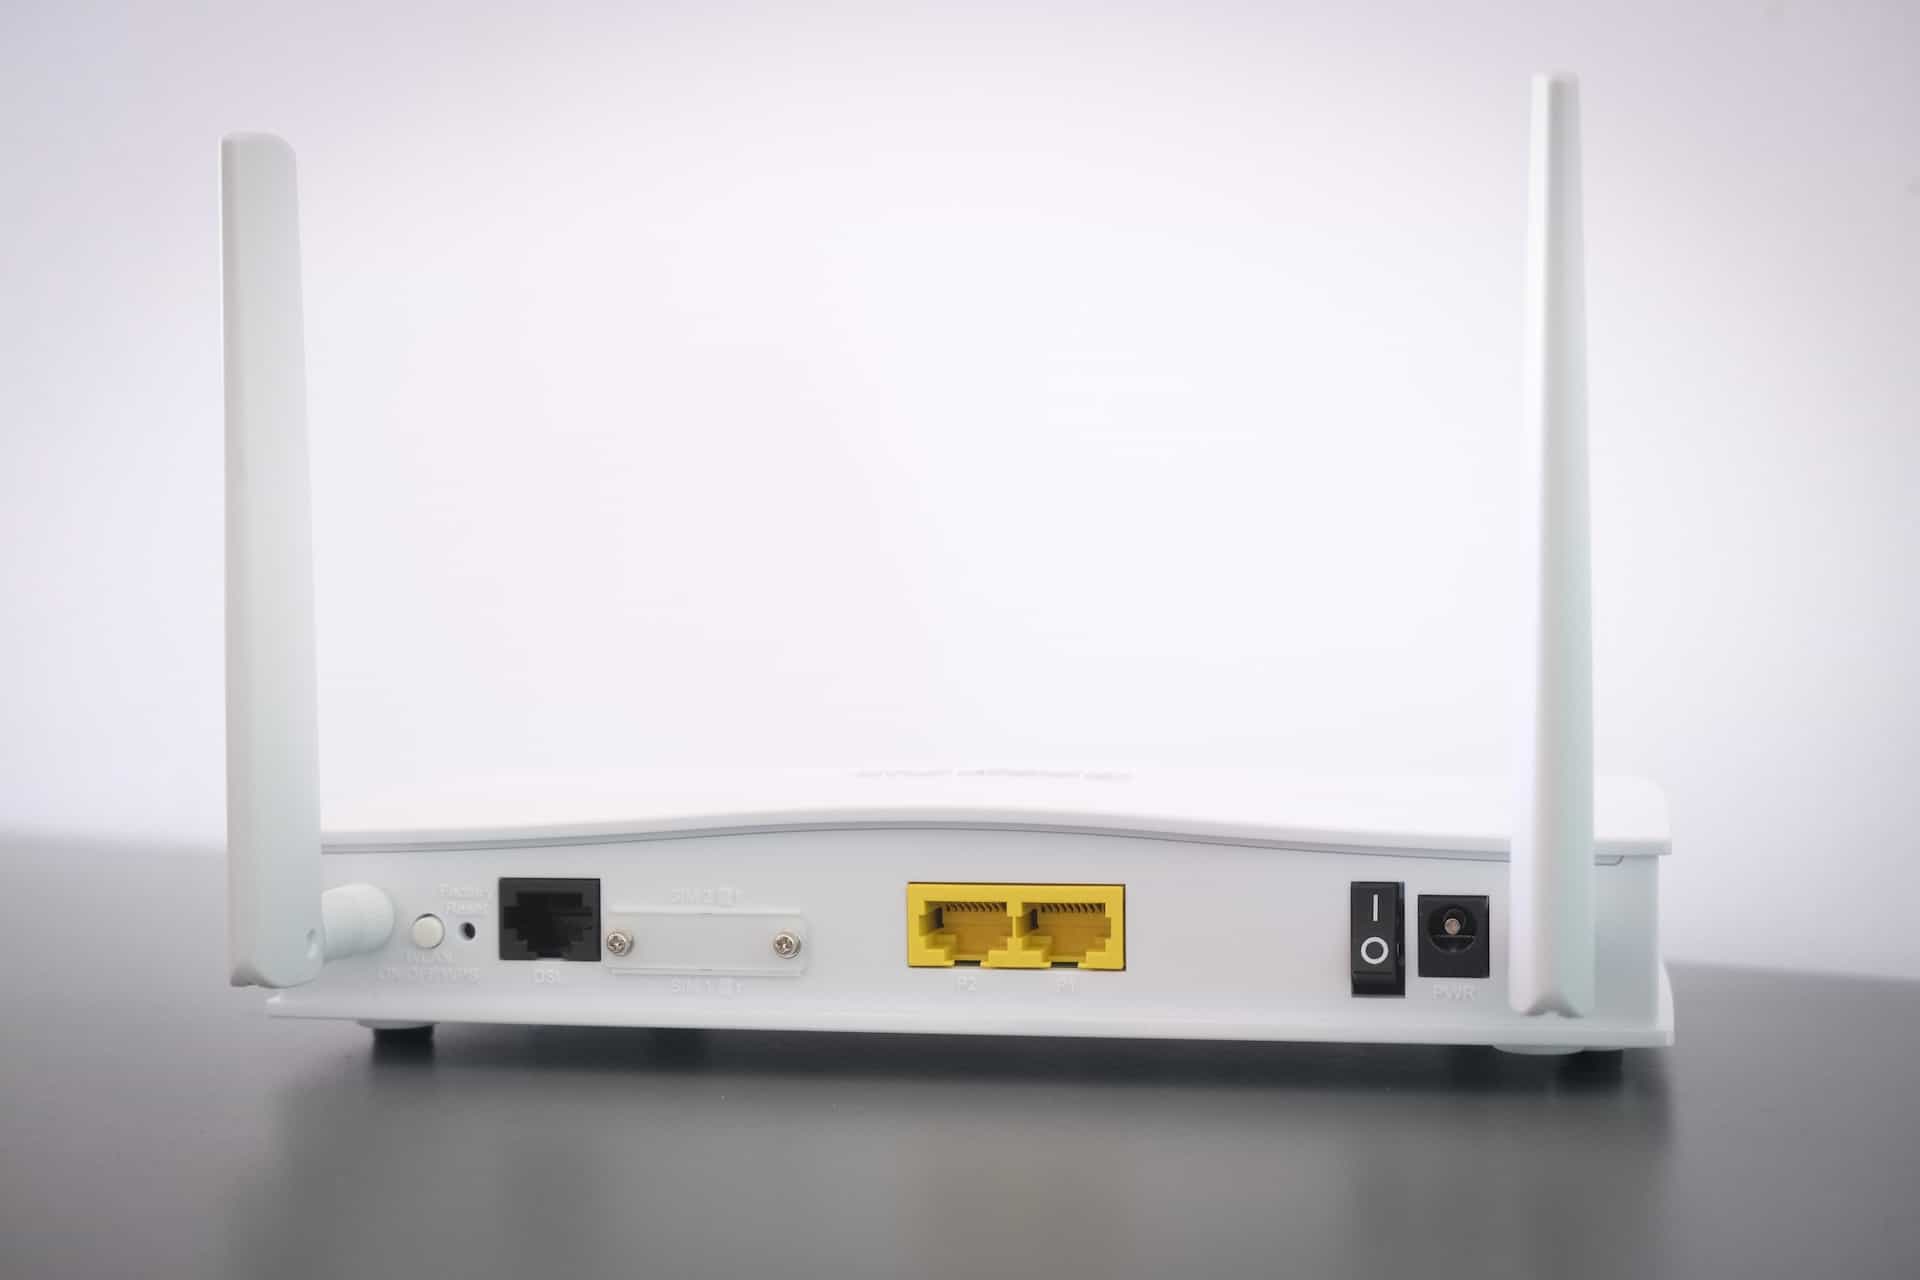 Router box